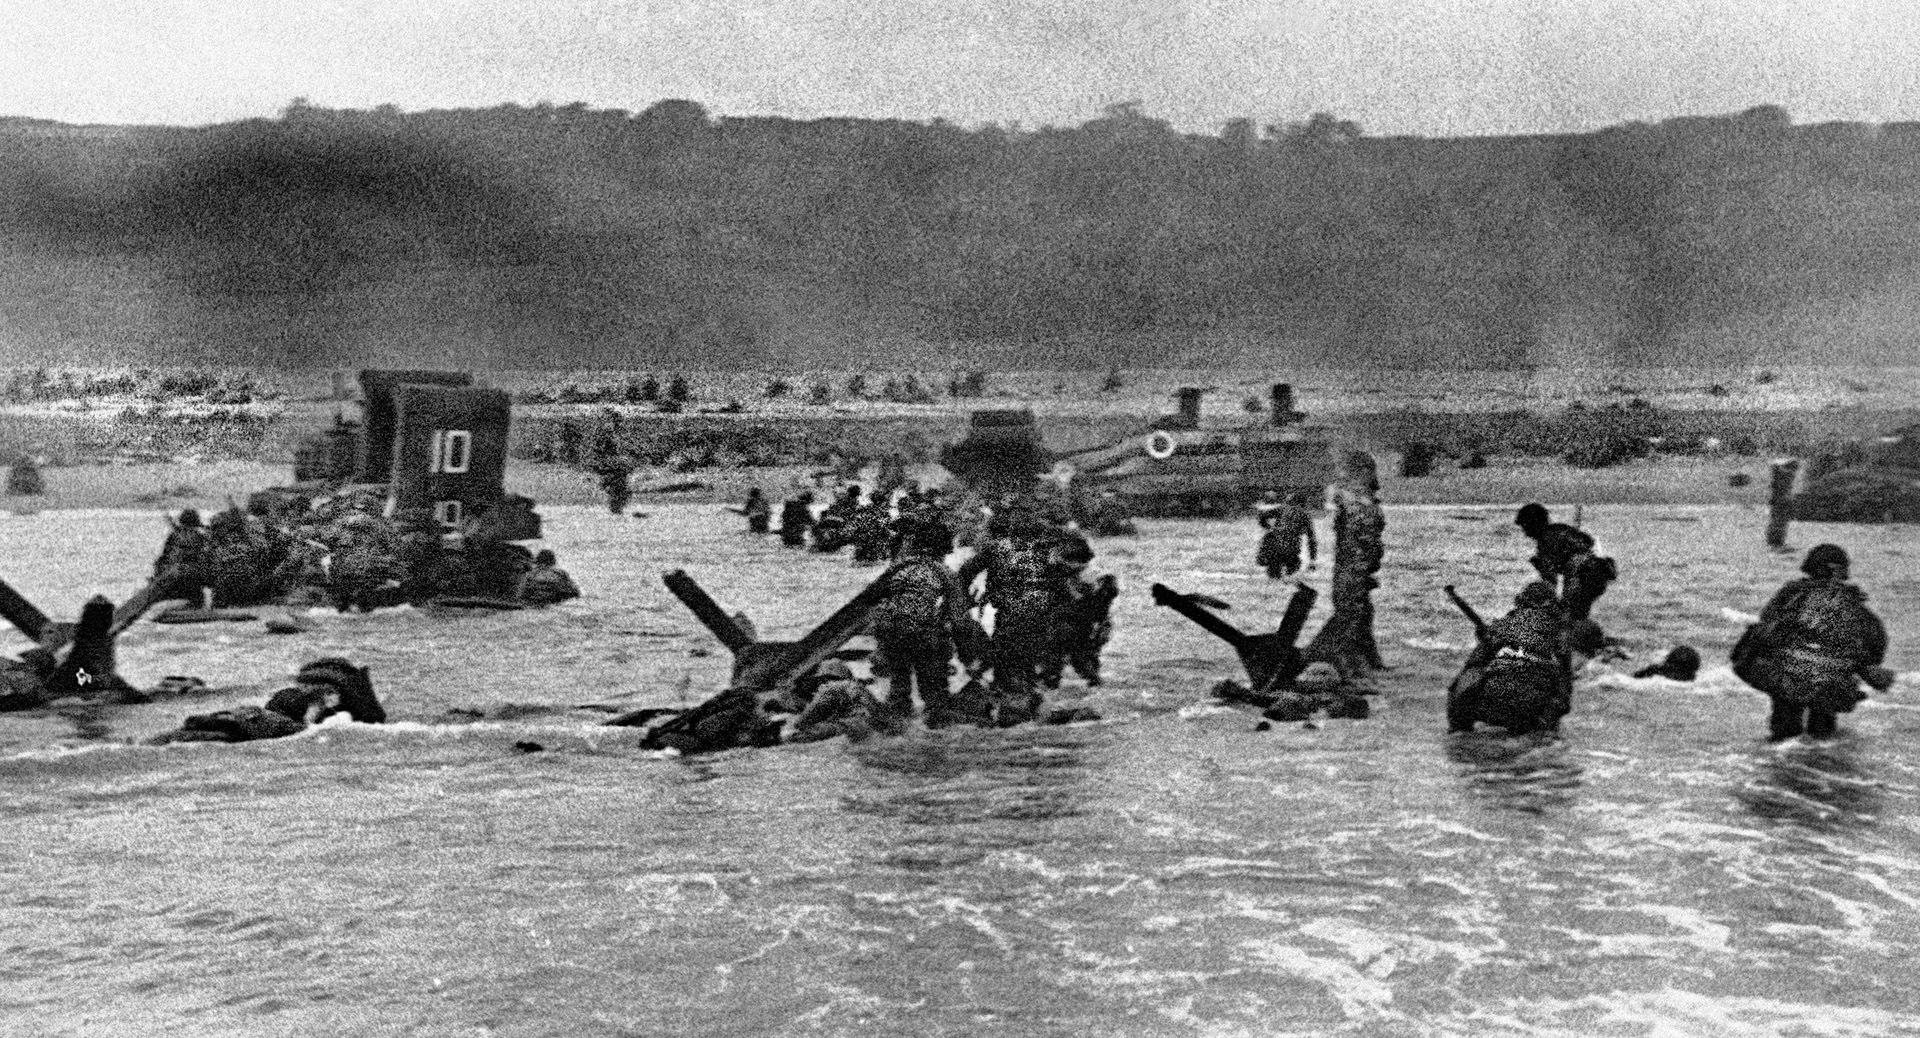  Another Robert Capa photo, taken as he departed his landing craft with the combat troops, shows men wading inland while others take shelter behind beach obstacles or three of the six DD tanks that made it to shore.